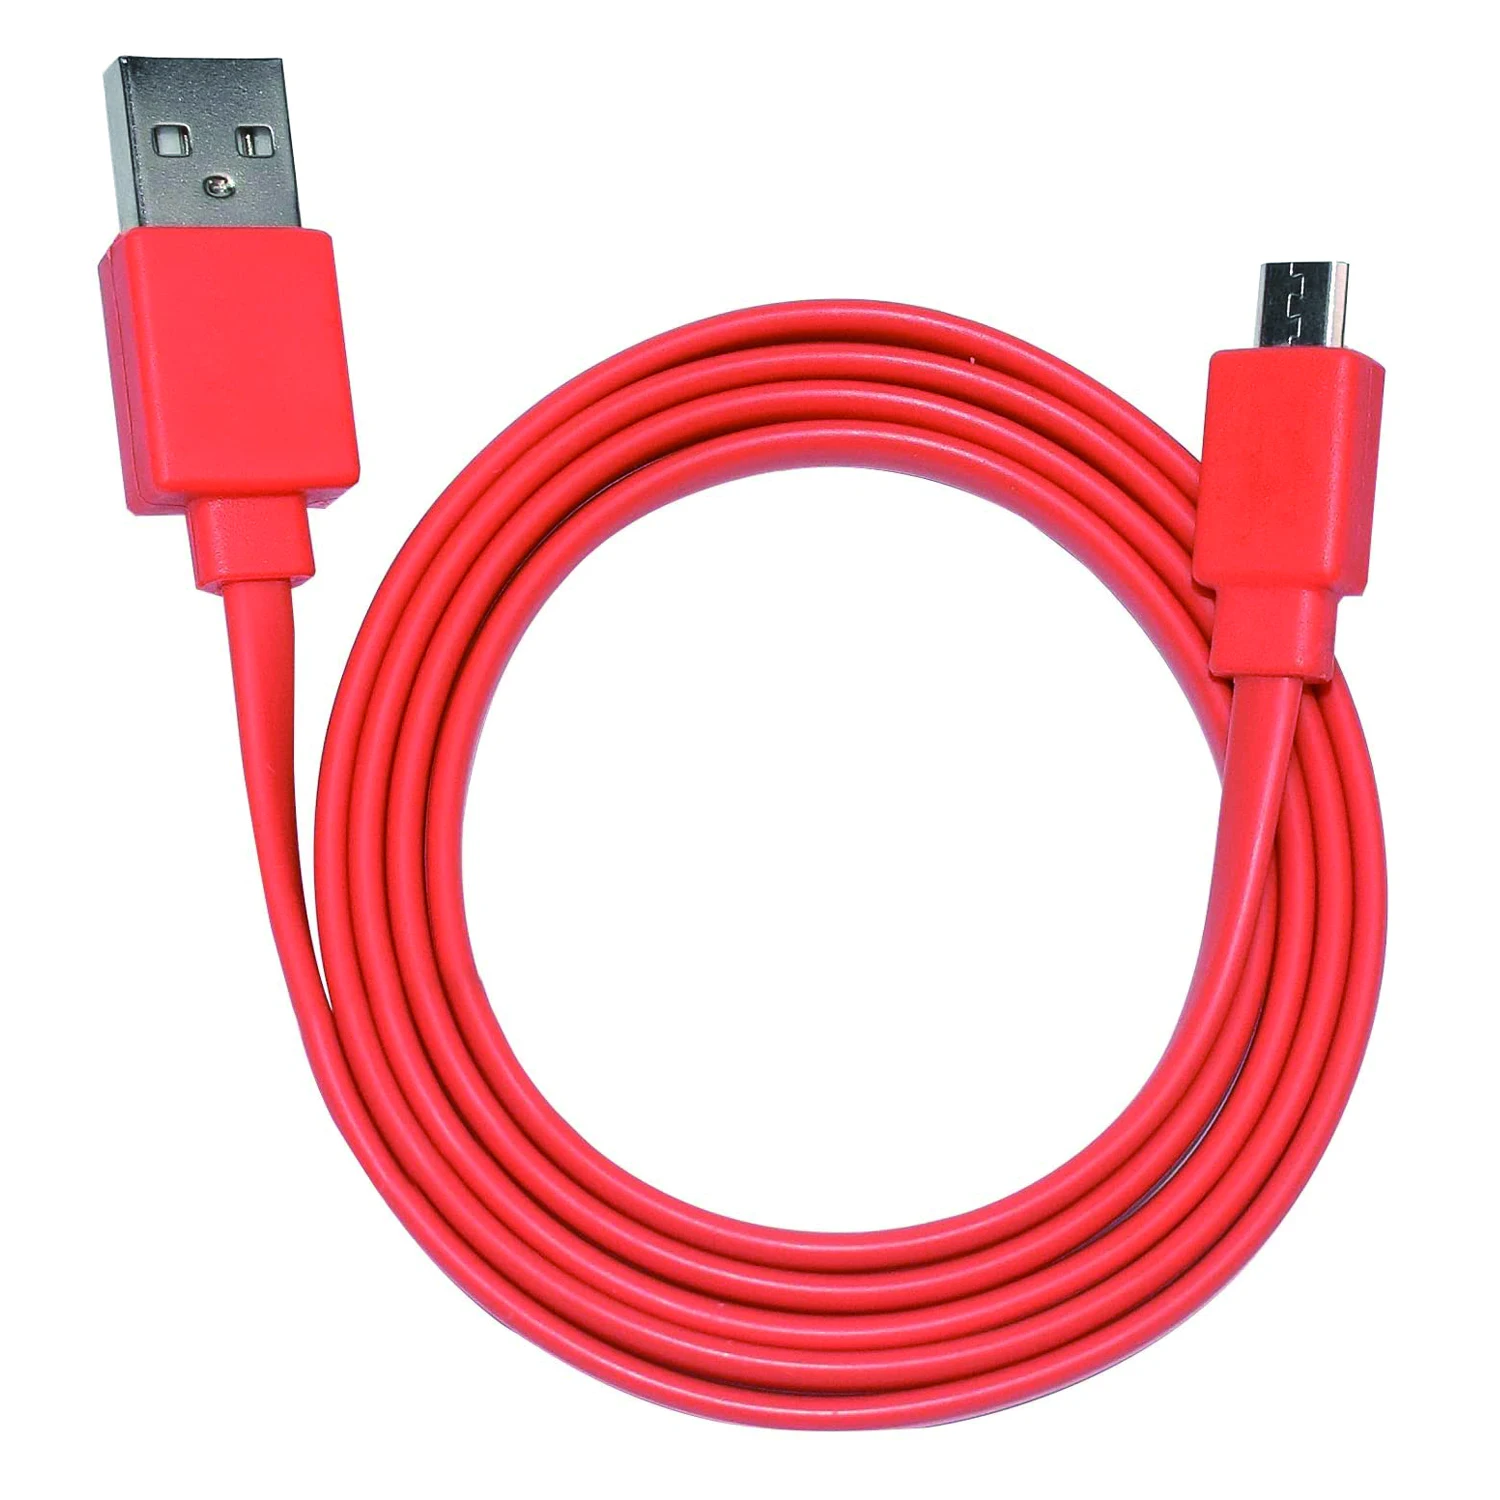 Replacement Orange Micro USB Power Charger Data Cord Charging Cable for JBL Charge 3+ Flip3 Flip2 Bluetooth Speaker